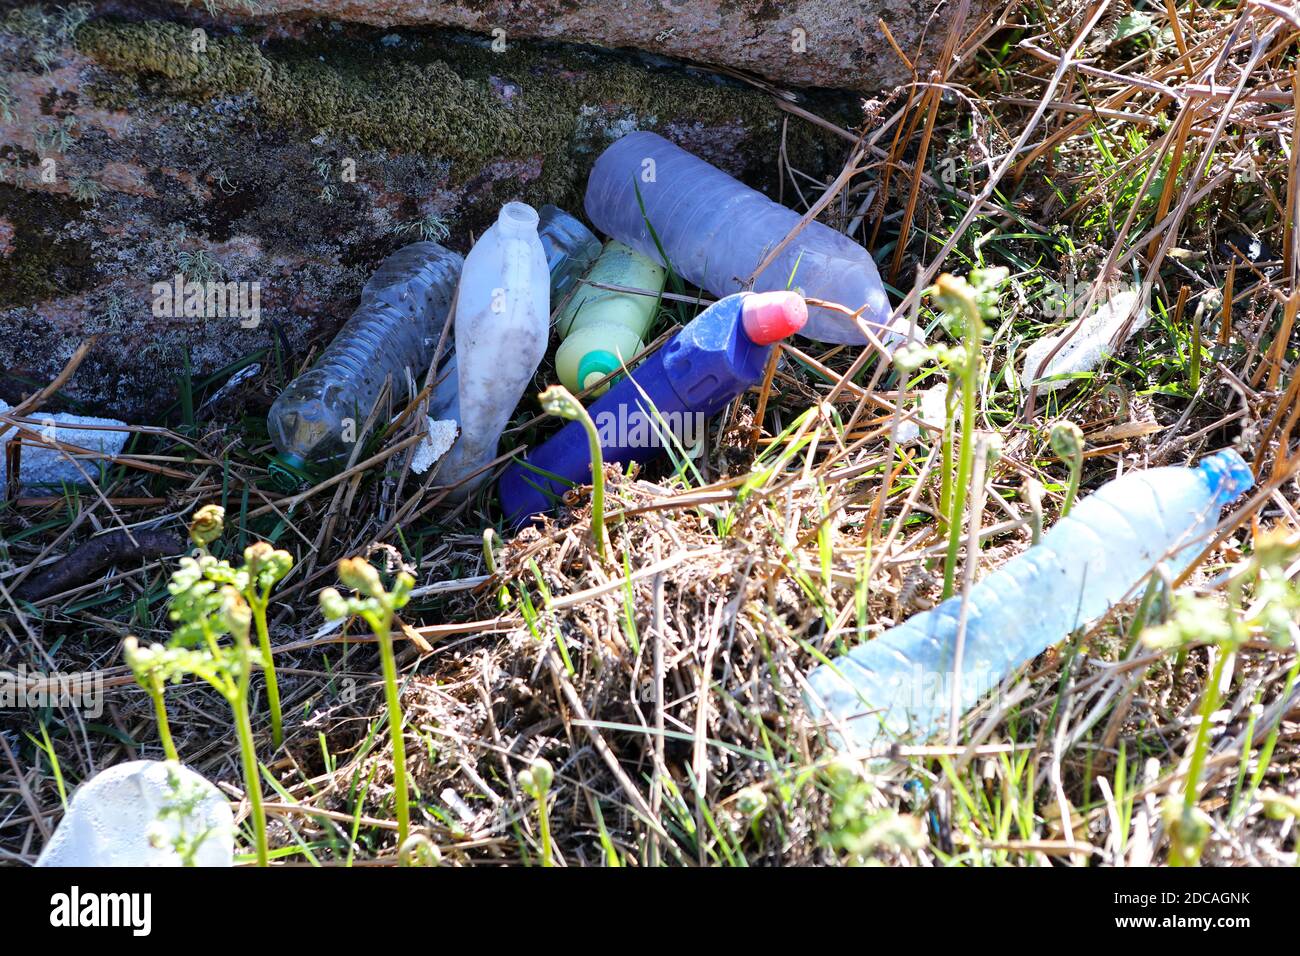 Plastic rubbish washed up on the coastline from the sea Stock Photo